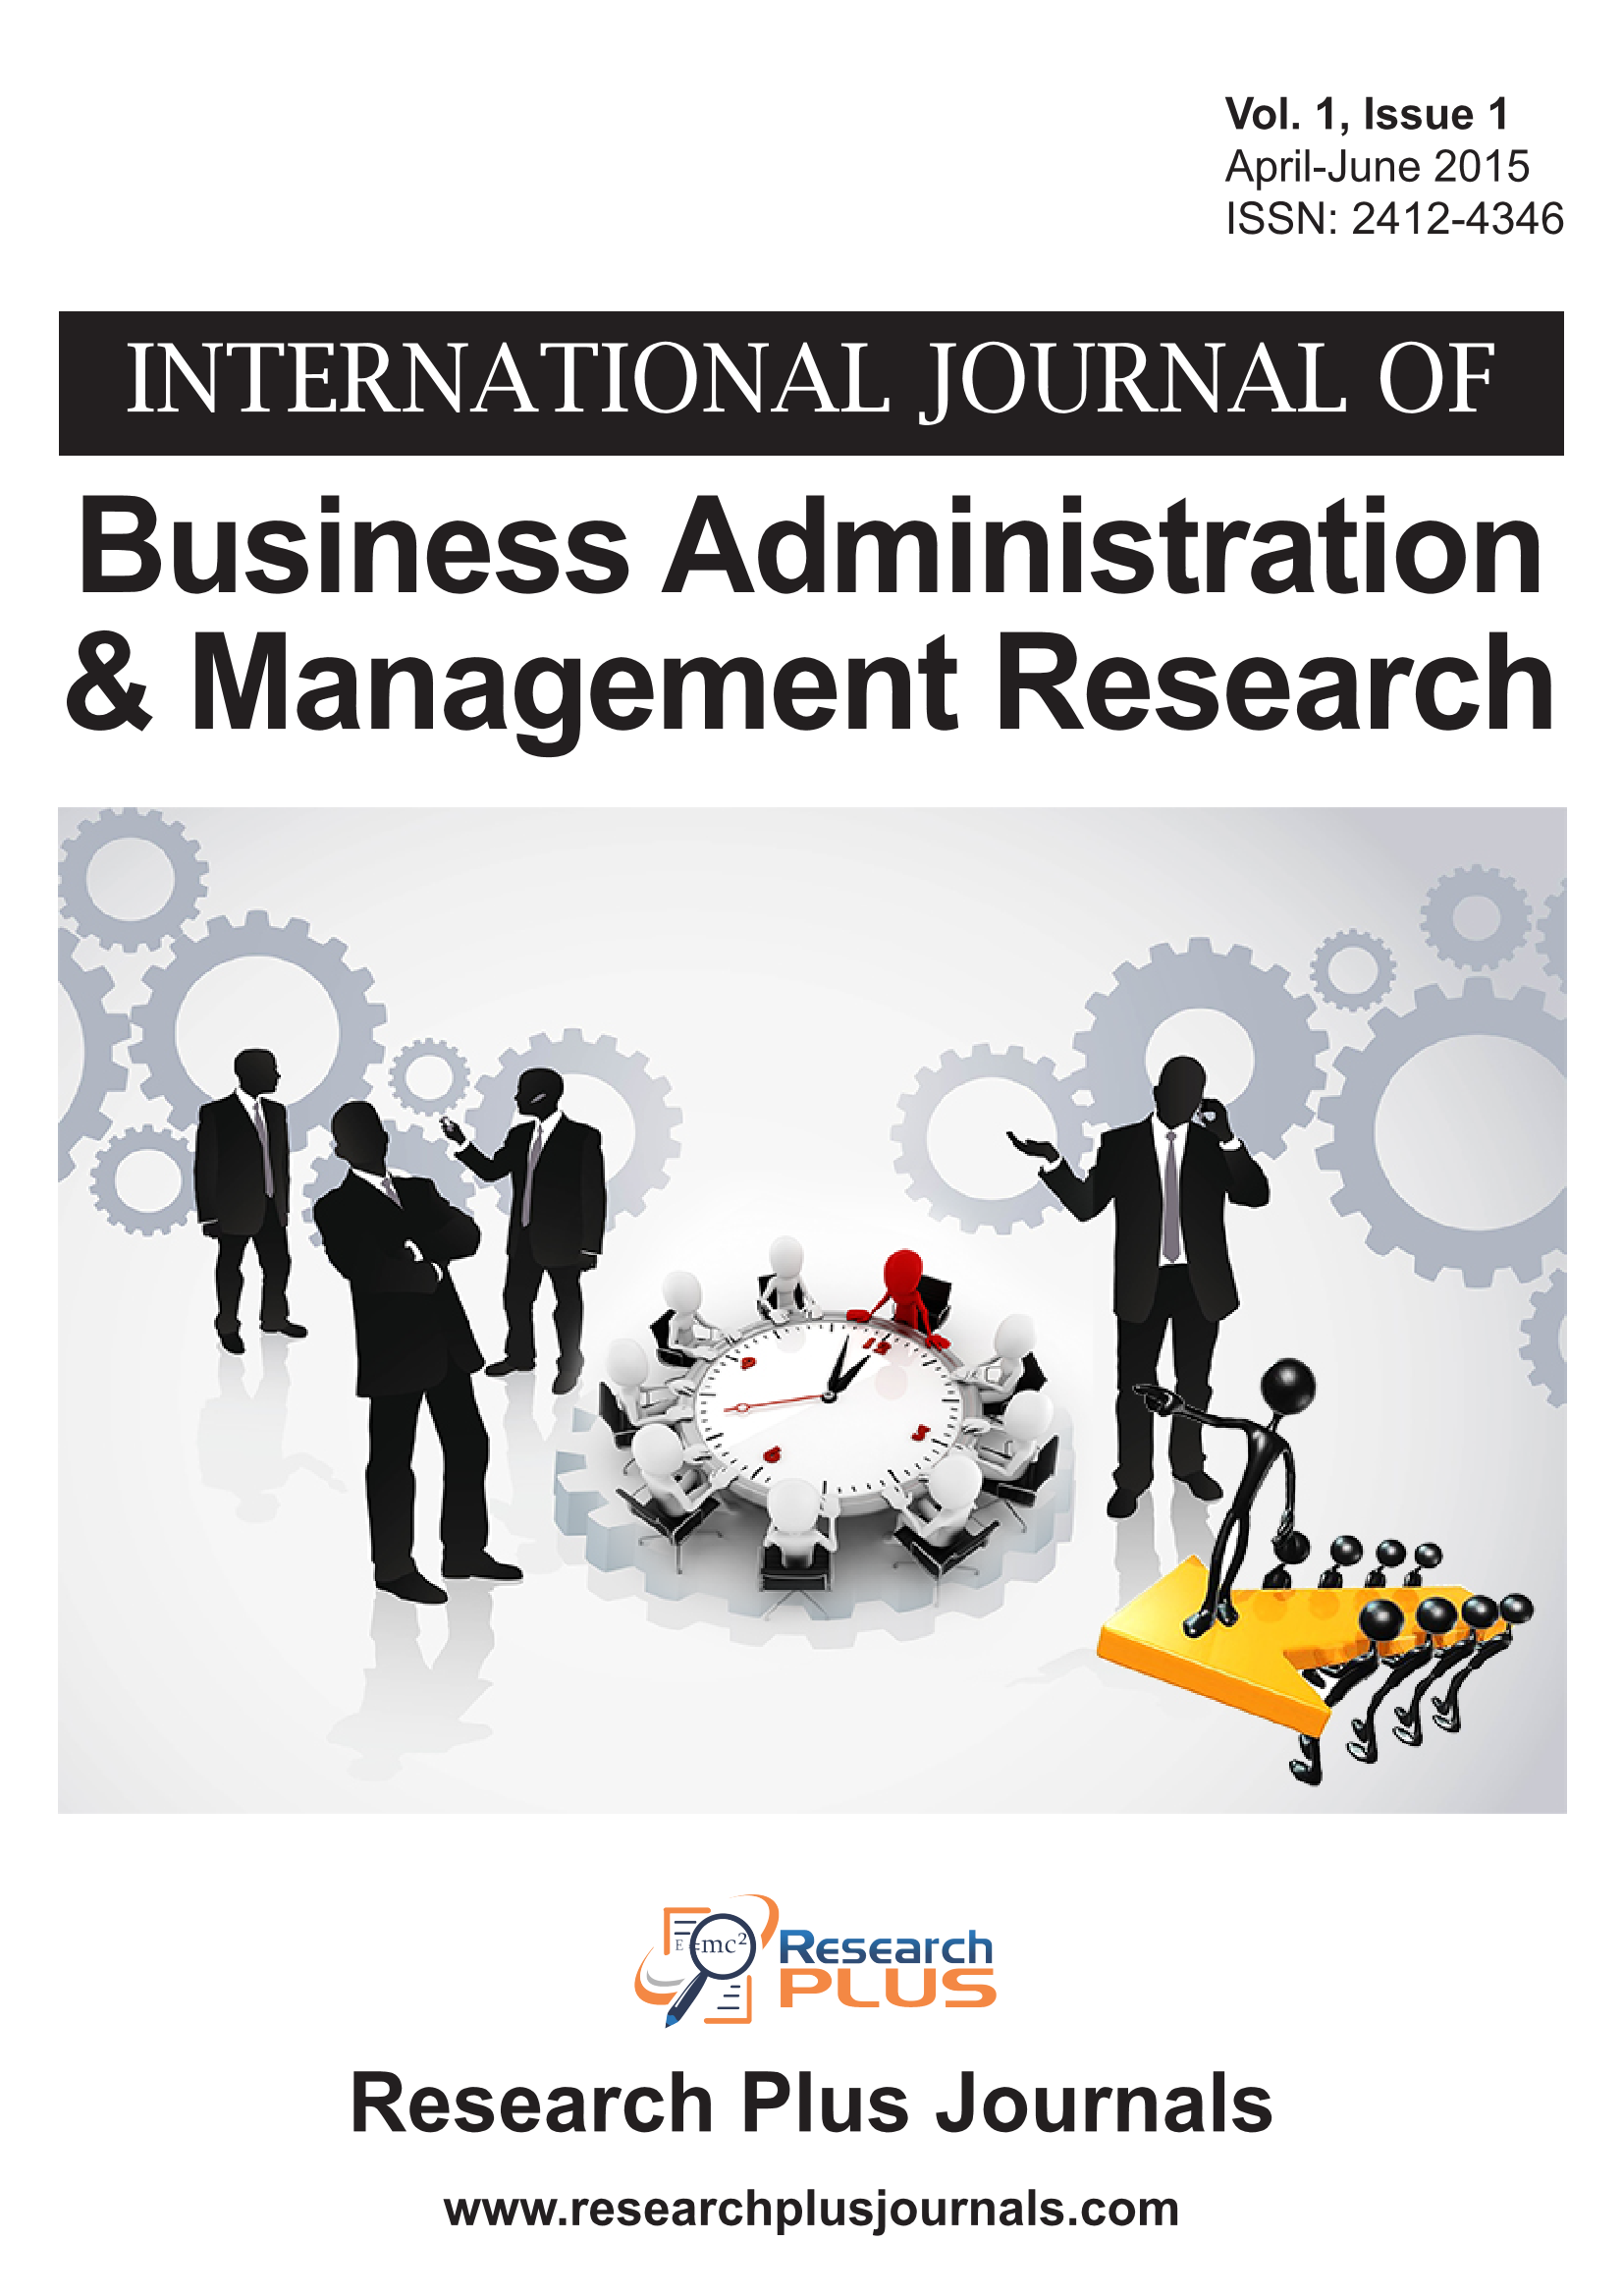 Volume 1, Issue 1 International Journal of Business Administration and Management Research